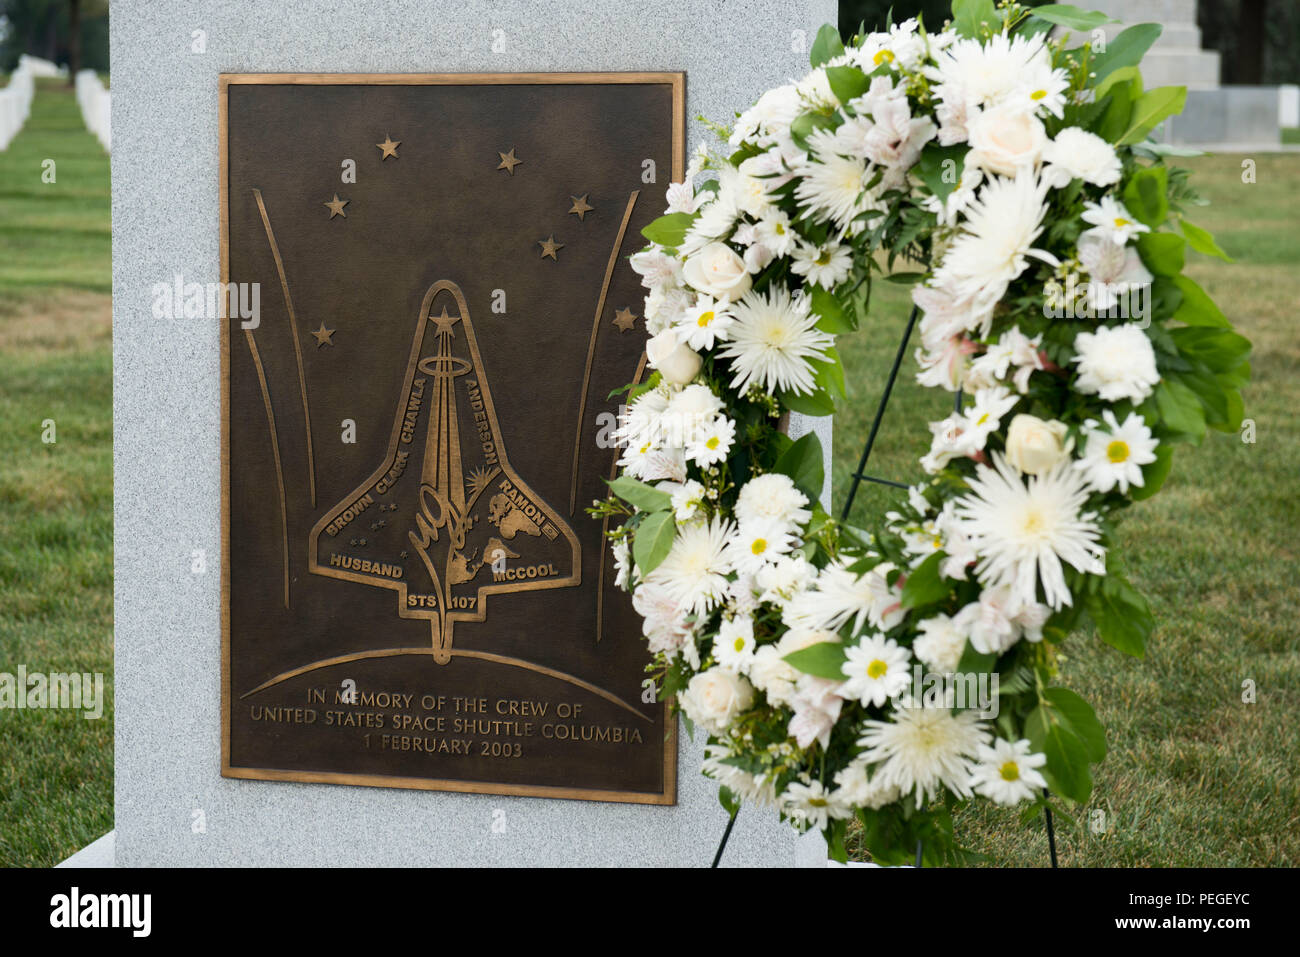 A wreath laid by Chief Minister of Haryana, India Manohar Lal Khattar rests next to the Space Shuttle Columbia Memorial near the Memorial Amphitheater in Arlington National Cemetery, Aug. 18, 2015, in Arlington, Va. Kalpana Chawla, one of seven crew members killed during the Columbia disaster, was born in Karnal, India and was posthumously awarded the Congressional Space Medal of Honor, the NASA Space Flight Medal, and the NASA Distinguished Service Medal. (U.S. Army photo by Rachel Larue/released) Stock Photo